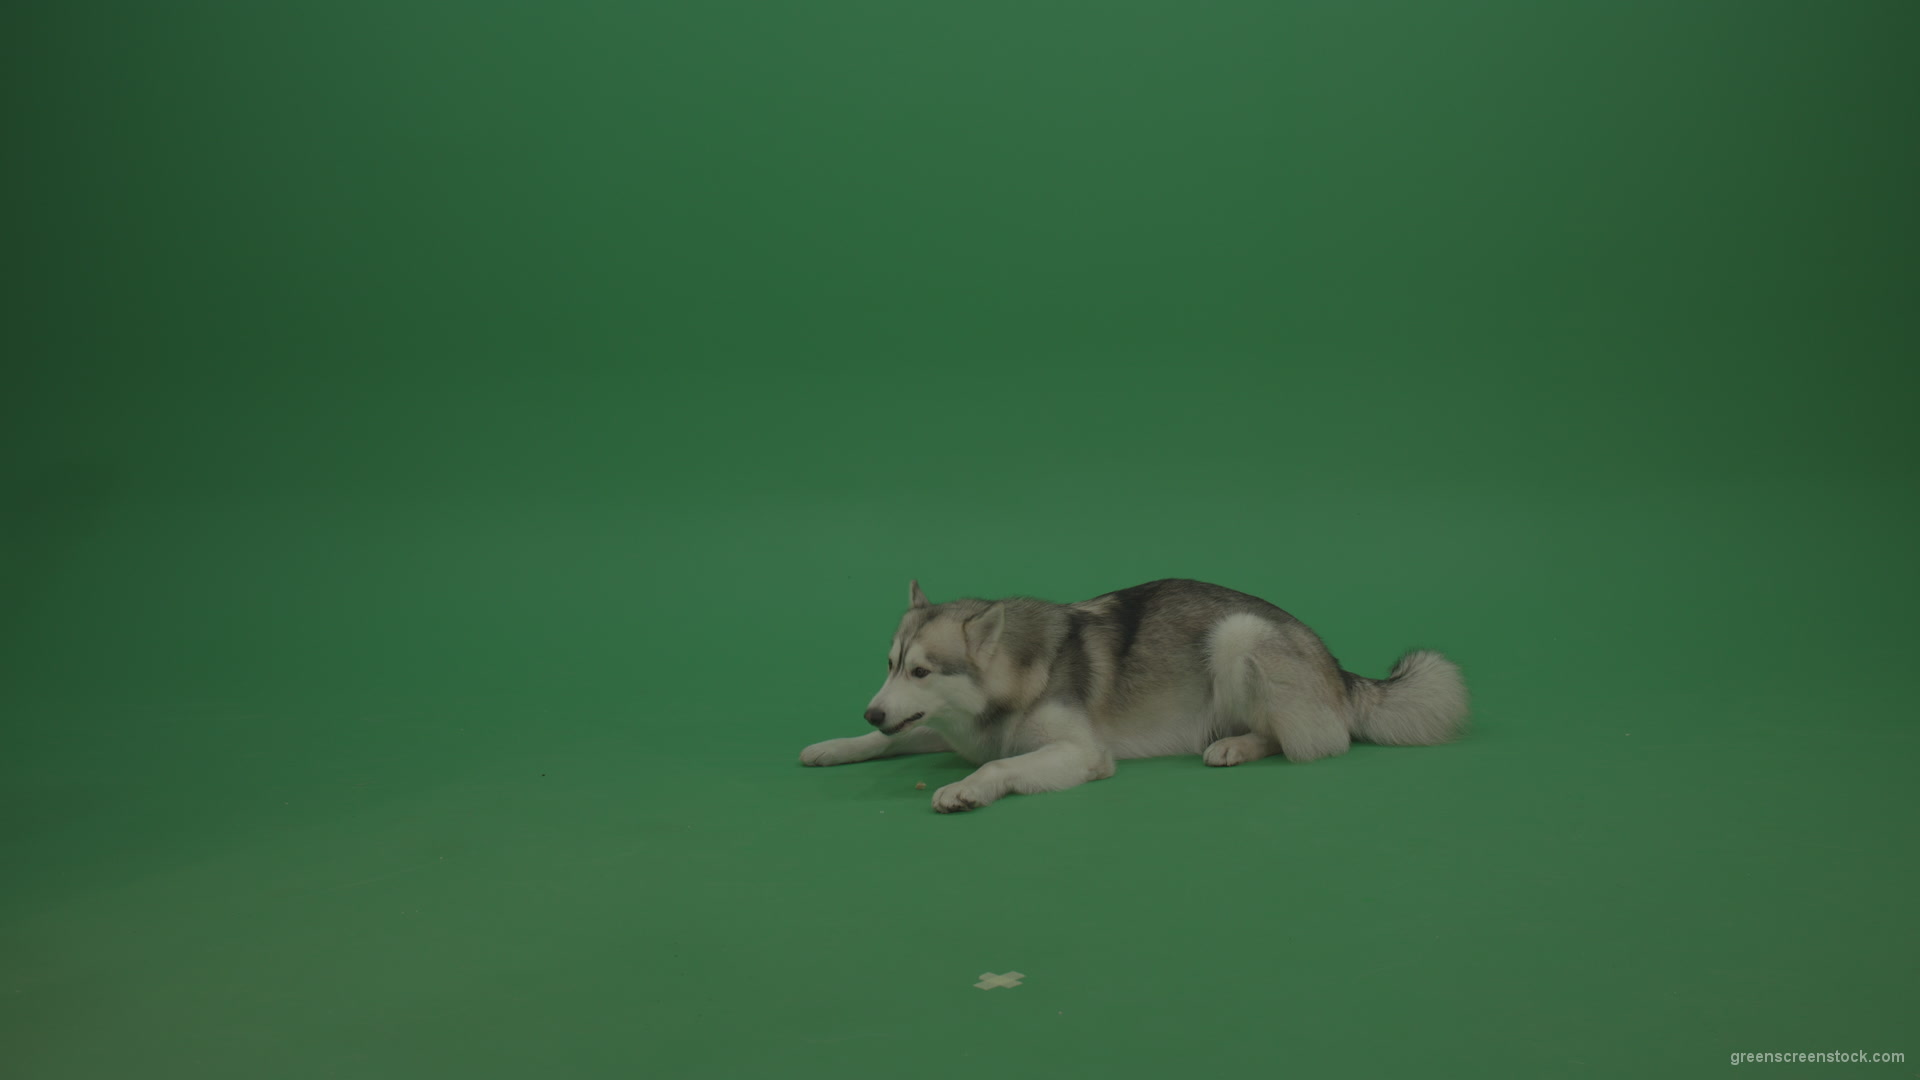 Grey_White_Huskie_Dog_Lying_On_The_Ground_Chewing_Coockie_Stands_Up_And_Walks_Away_Green_Screen_Wall_Background_002 Green Screen Stock